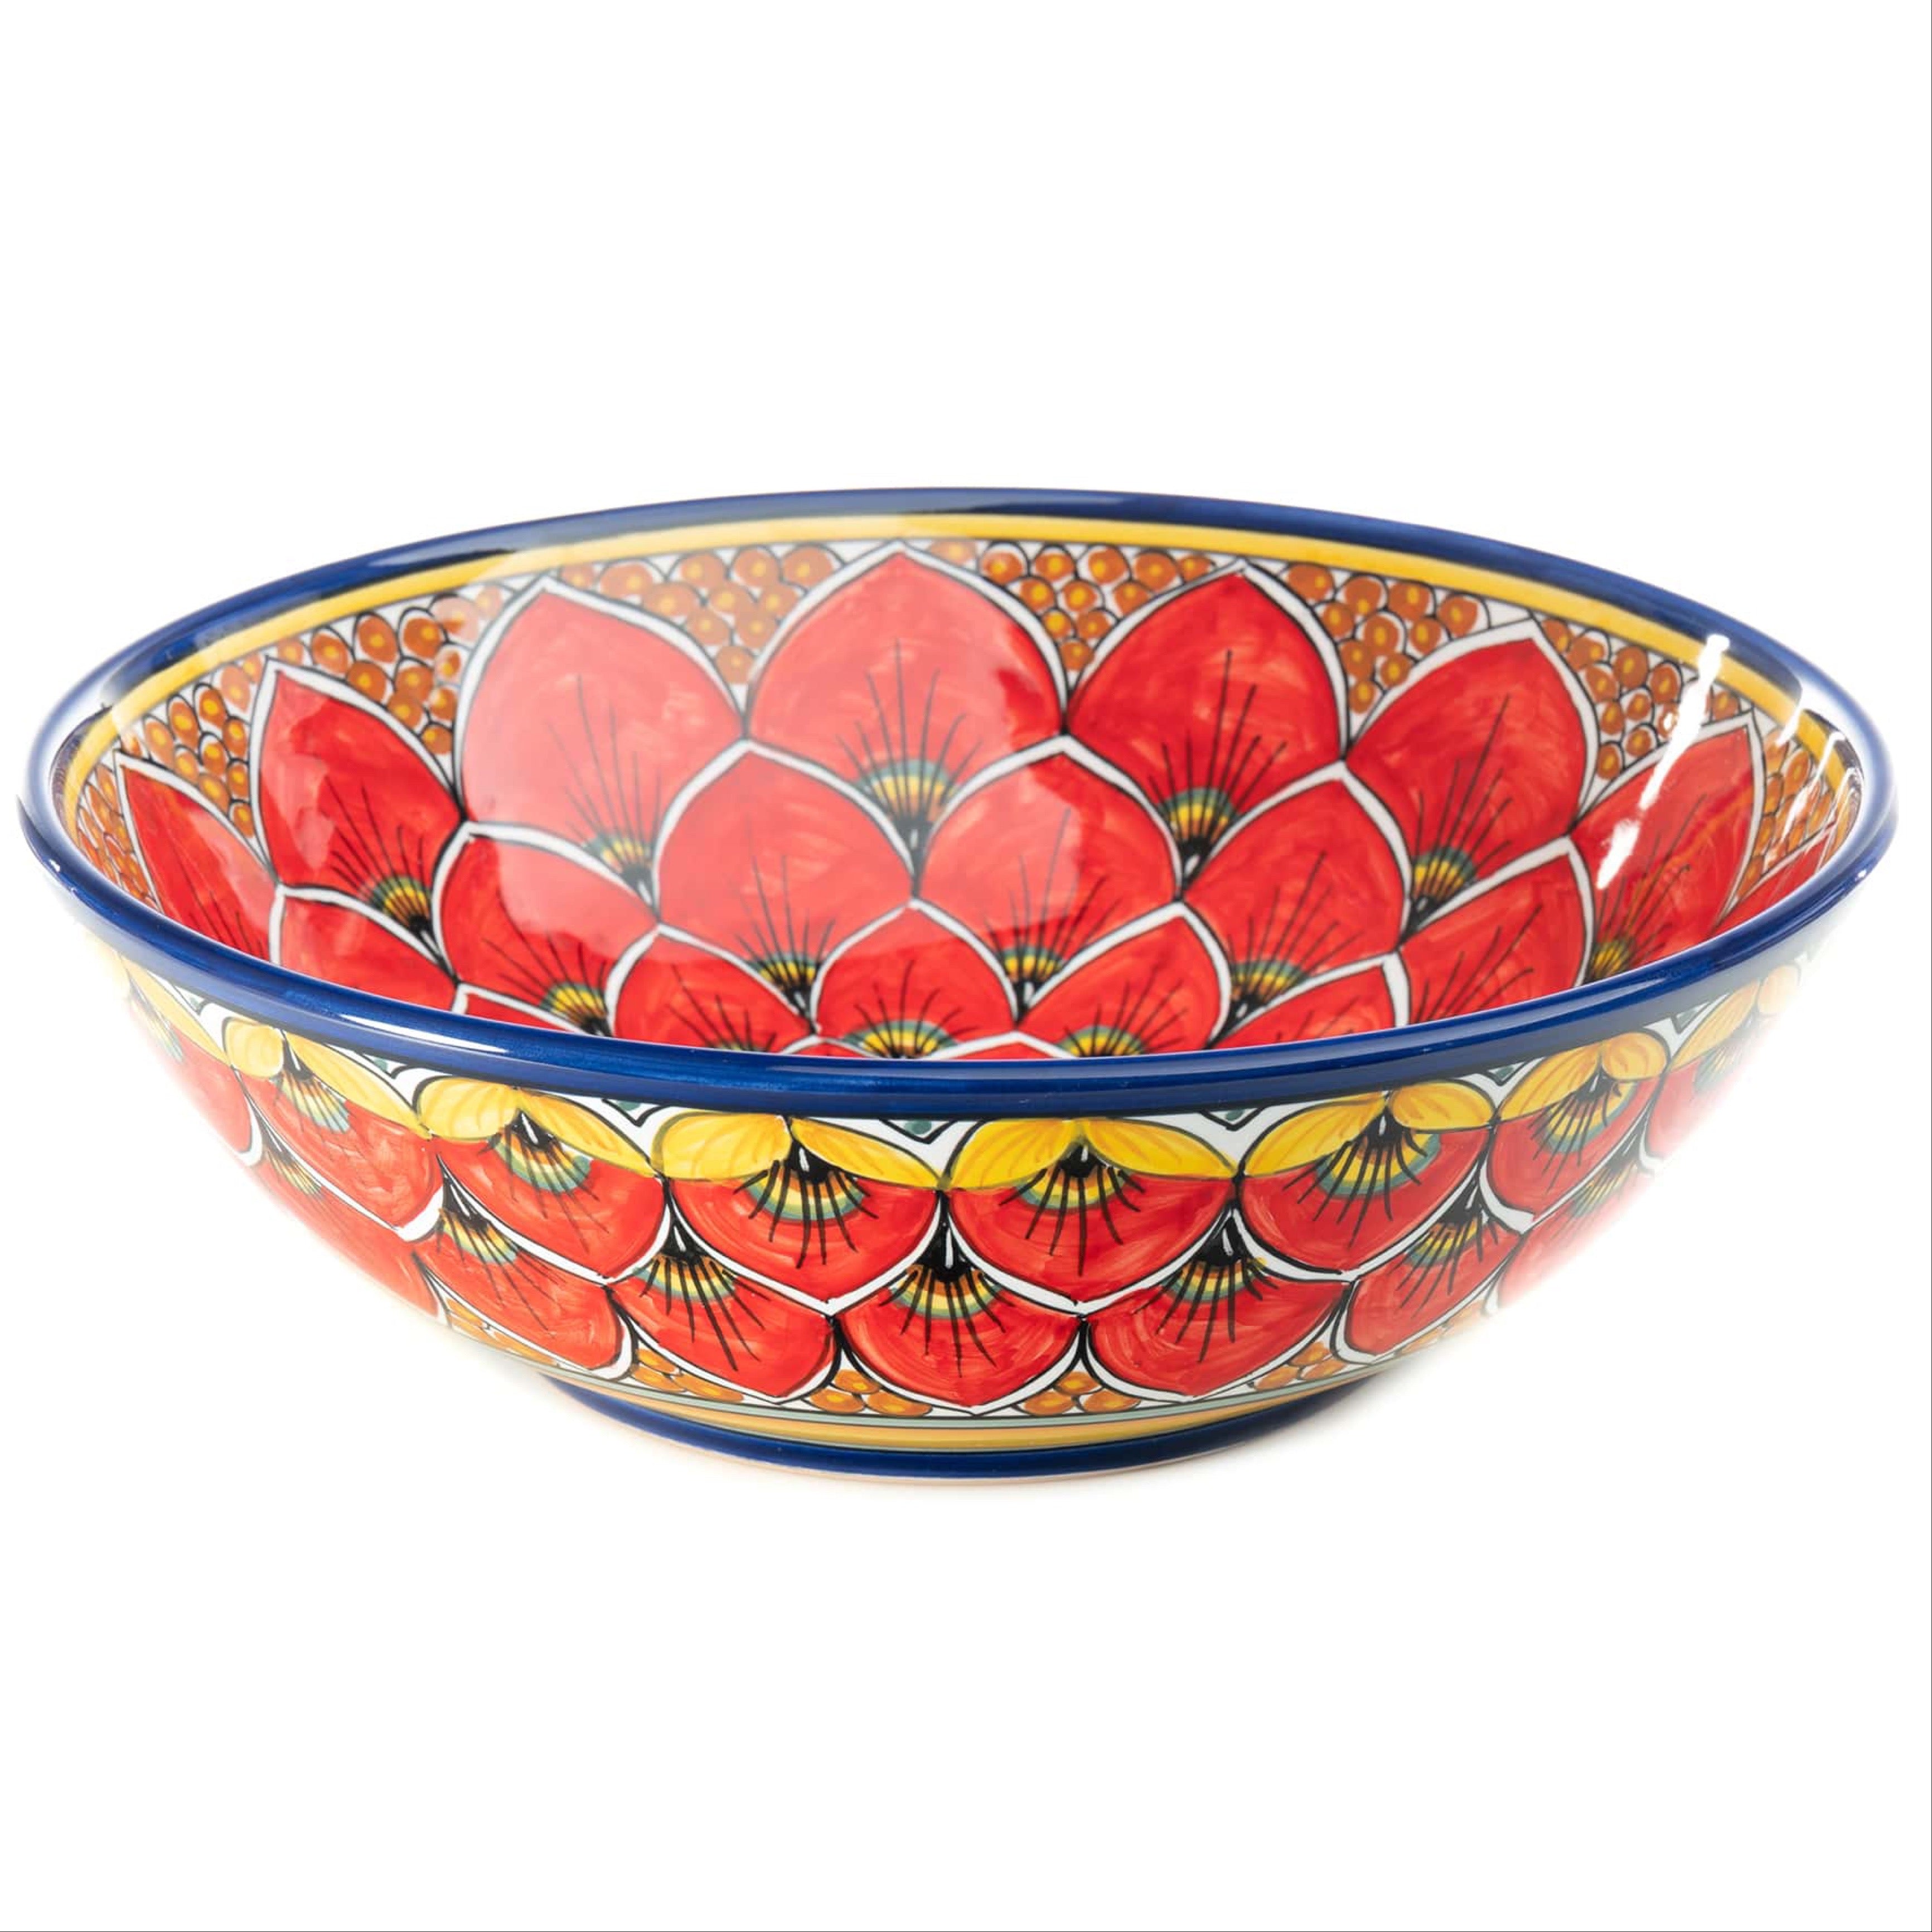 Geribi Salad Bowl (PG04) Red Peacock Design, ceramics, pottery, italian design, majolica, handmade, handcrafted, handpainted, home decor, kitchen art, home goods, deruta, majolica, Artisan, treasures, traditional art, modern art, gift ideas, style, SF, shop small business, artists, shop online, landmark store, legacy, one of a kind, limited edition, gift guide, gift shop, retail shop, decorations, shopping, italy, home staging, home decorating, home interiors